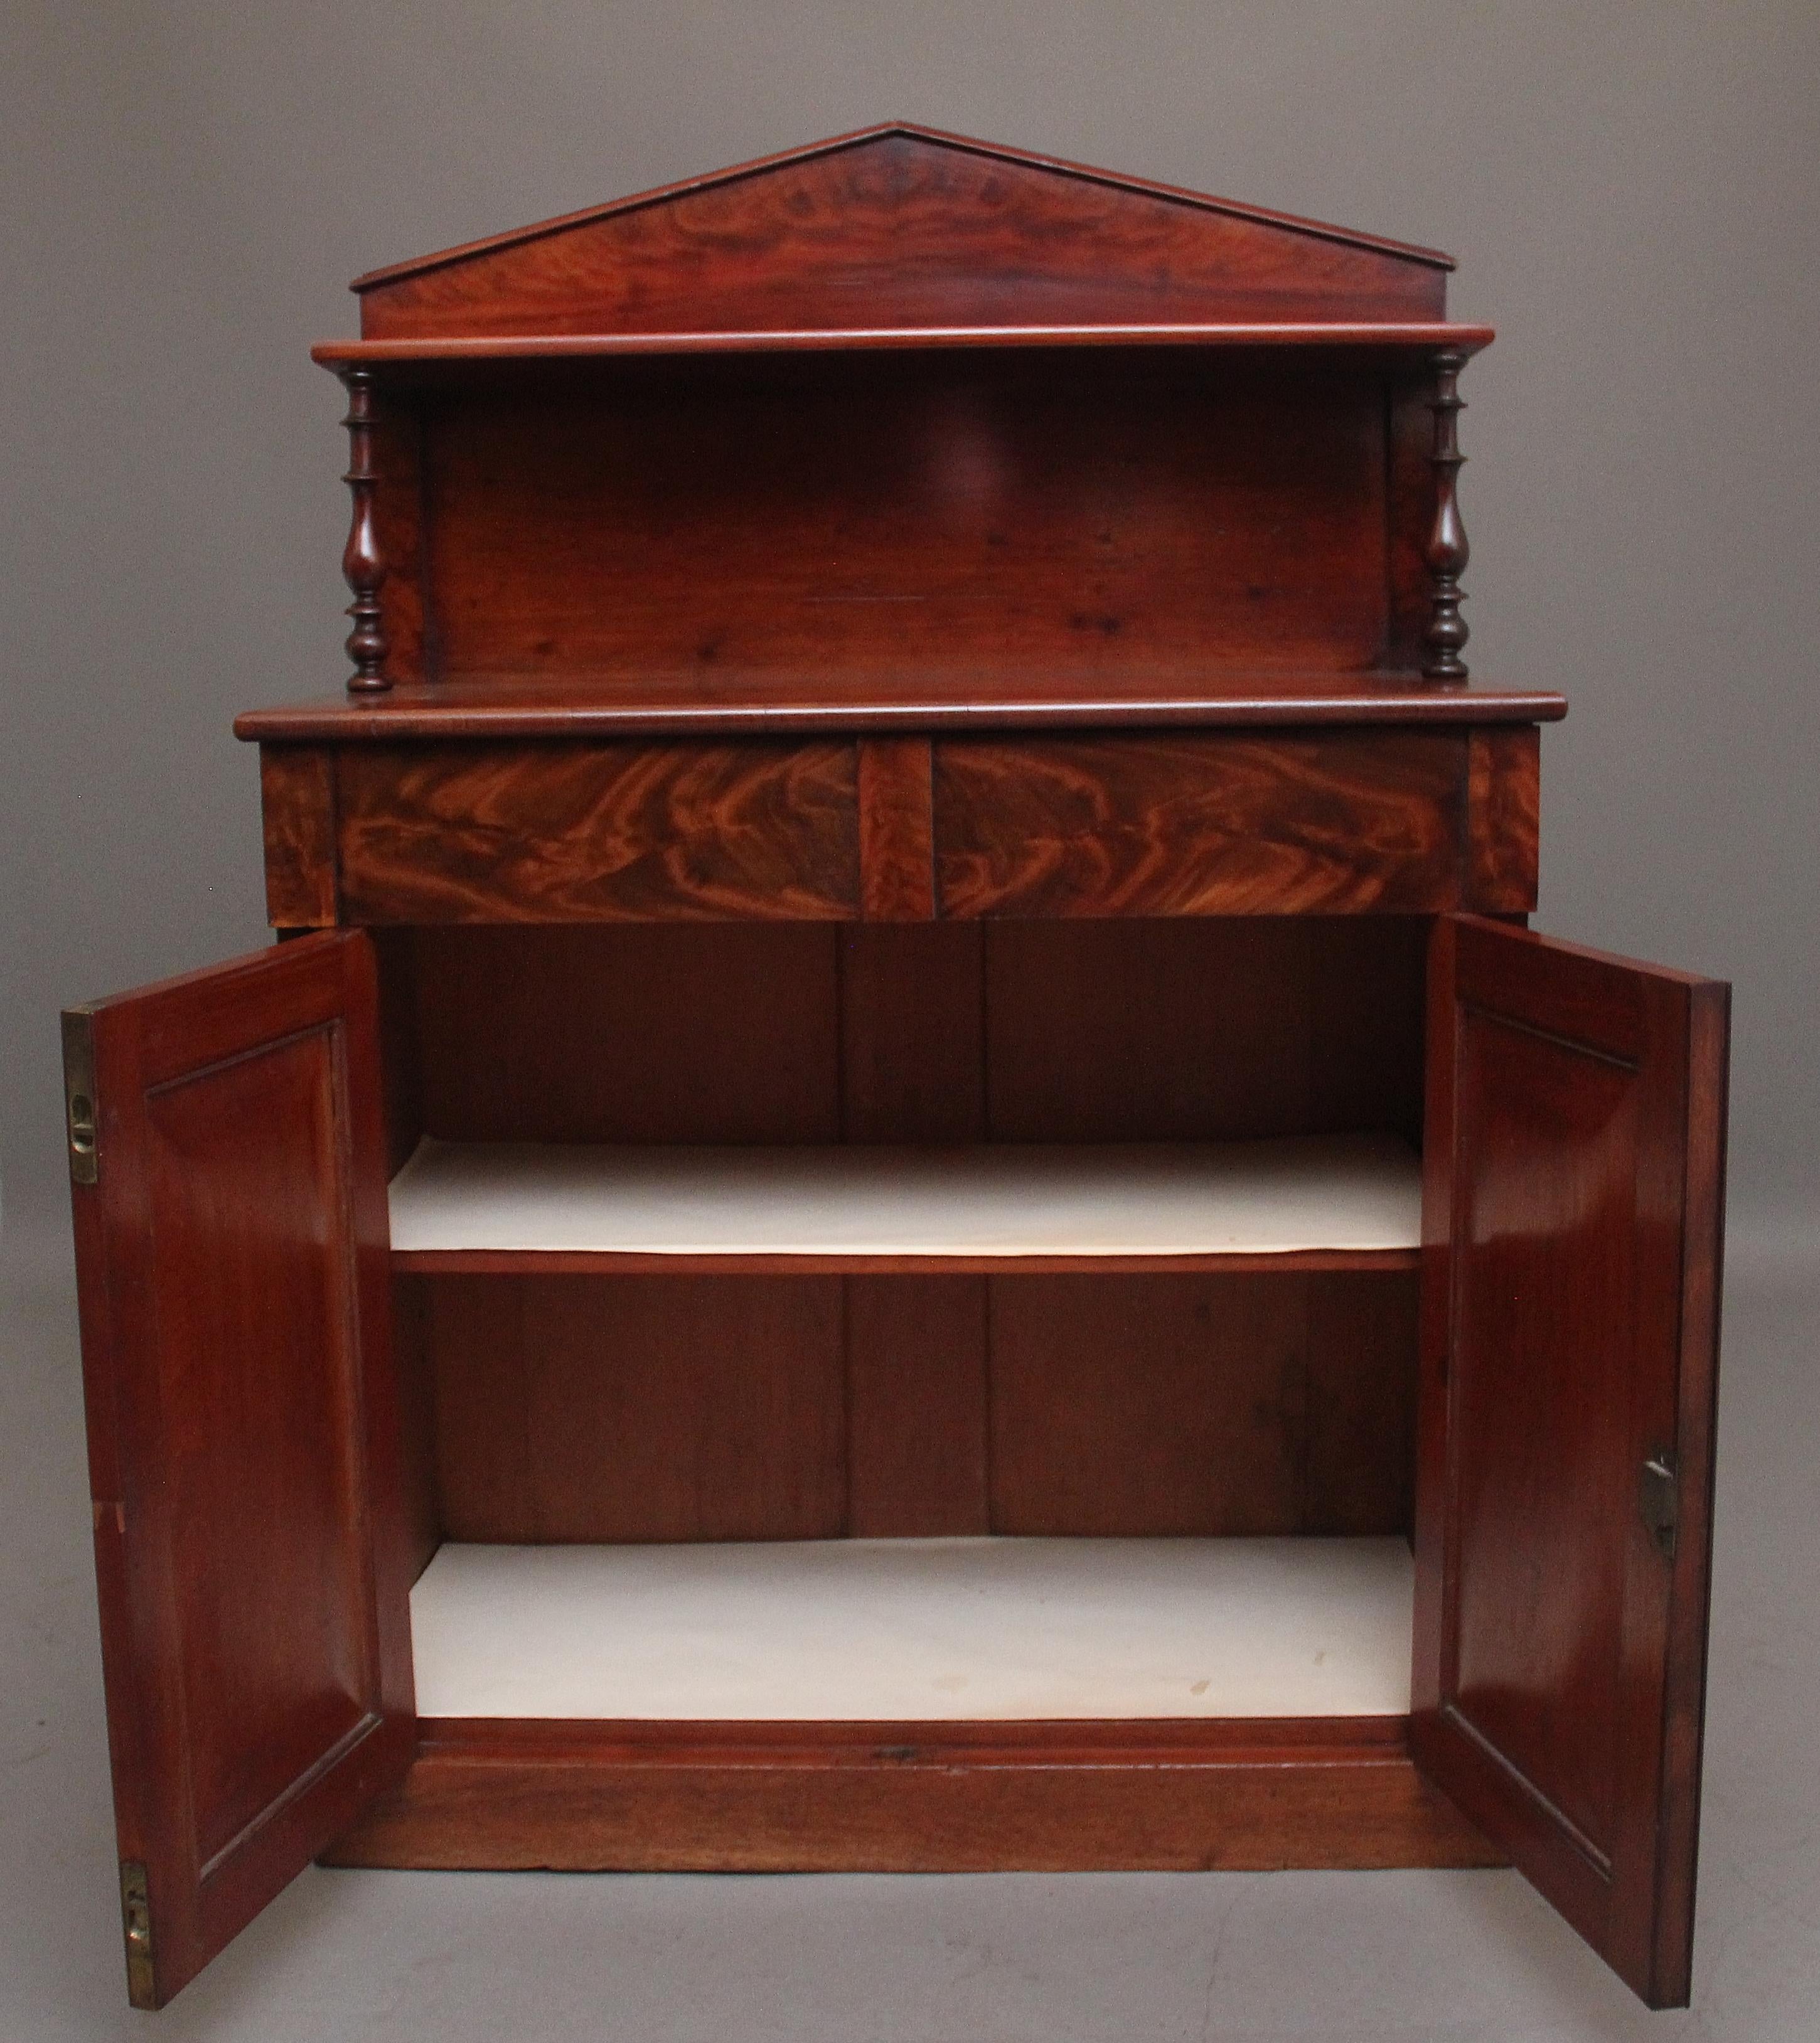 19th Century mahogany chiffonier / side cabinet, the arched cornice with a panelled back, finely turned columns supporting a single shelf, the bottom section having two frieze drawers above two panelled cupboard doors opening to reveal a single